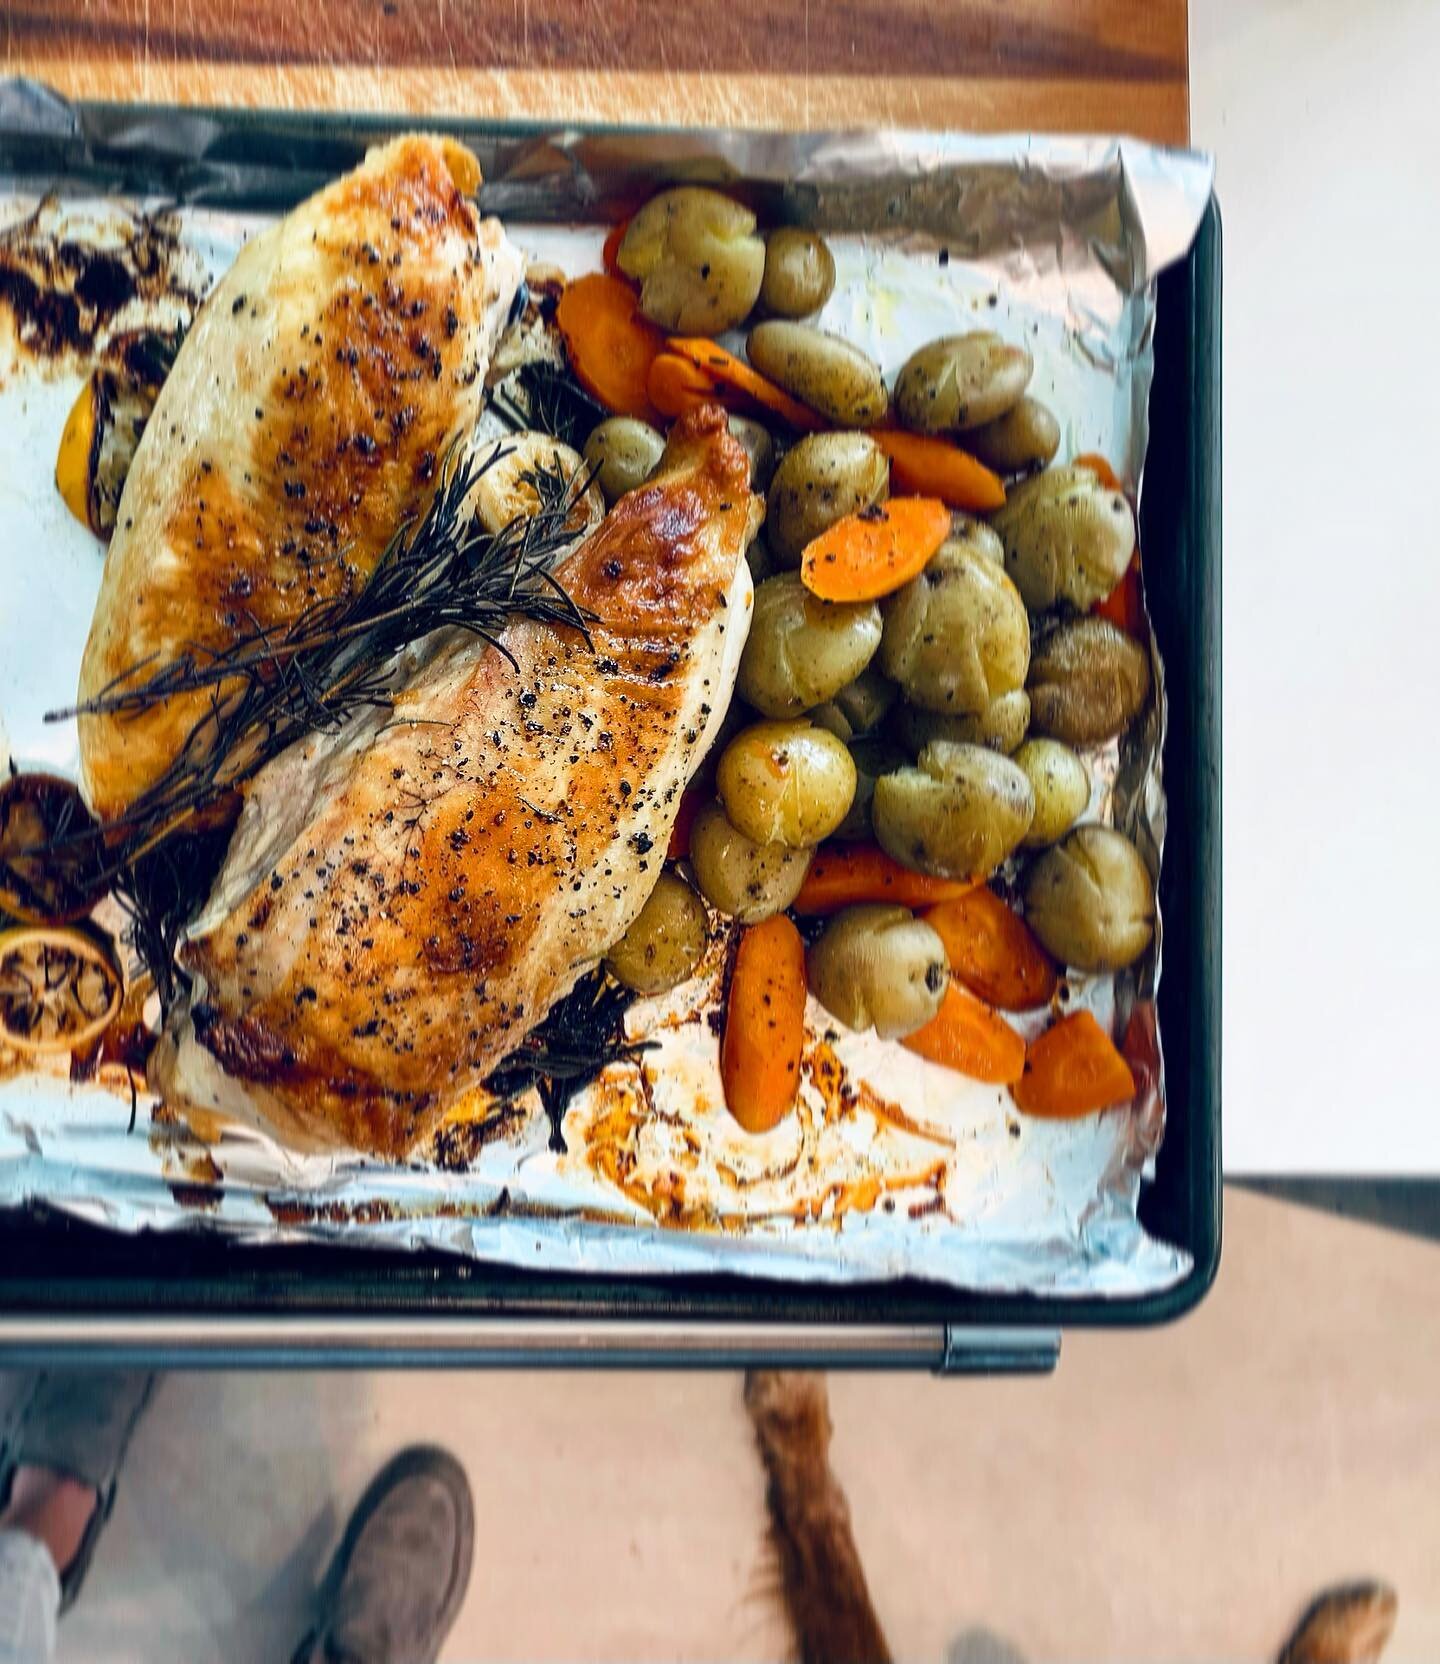 Does anyone else keep thinking today is Thursday? Ugh. 

🥔🥕🍗🌱🍋
Keeping this Wednesday dinner simple: roasted, chicken, potatoes, carrots, (not shown) haricot vert. 

P.S. Look at my &ldquo;work wife&rdquo; 🐾

#eatsimple #familydinner #wednesday